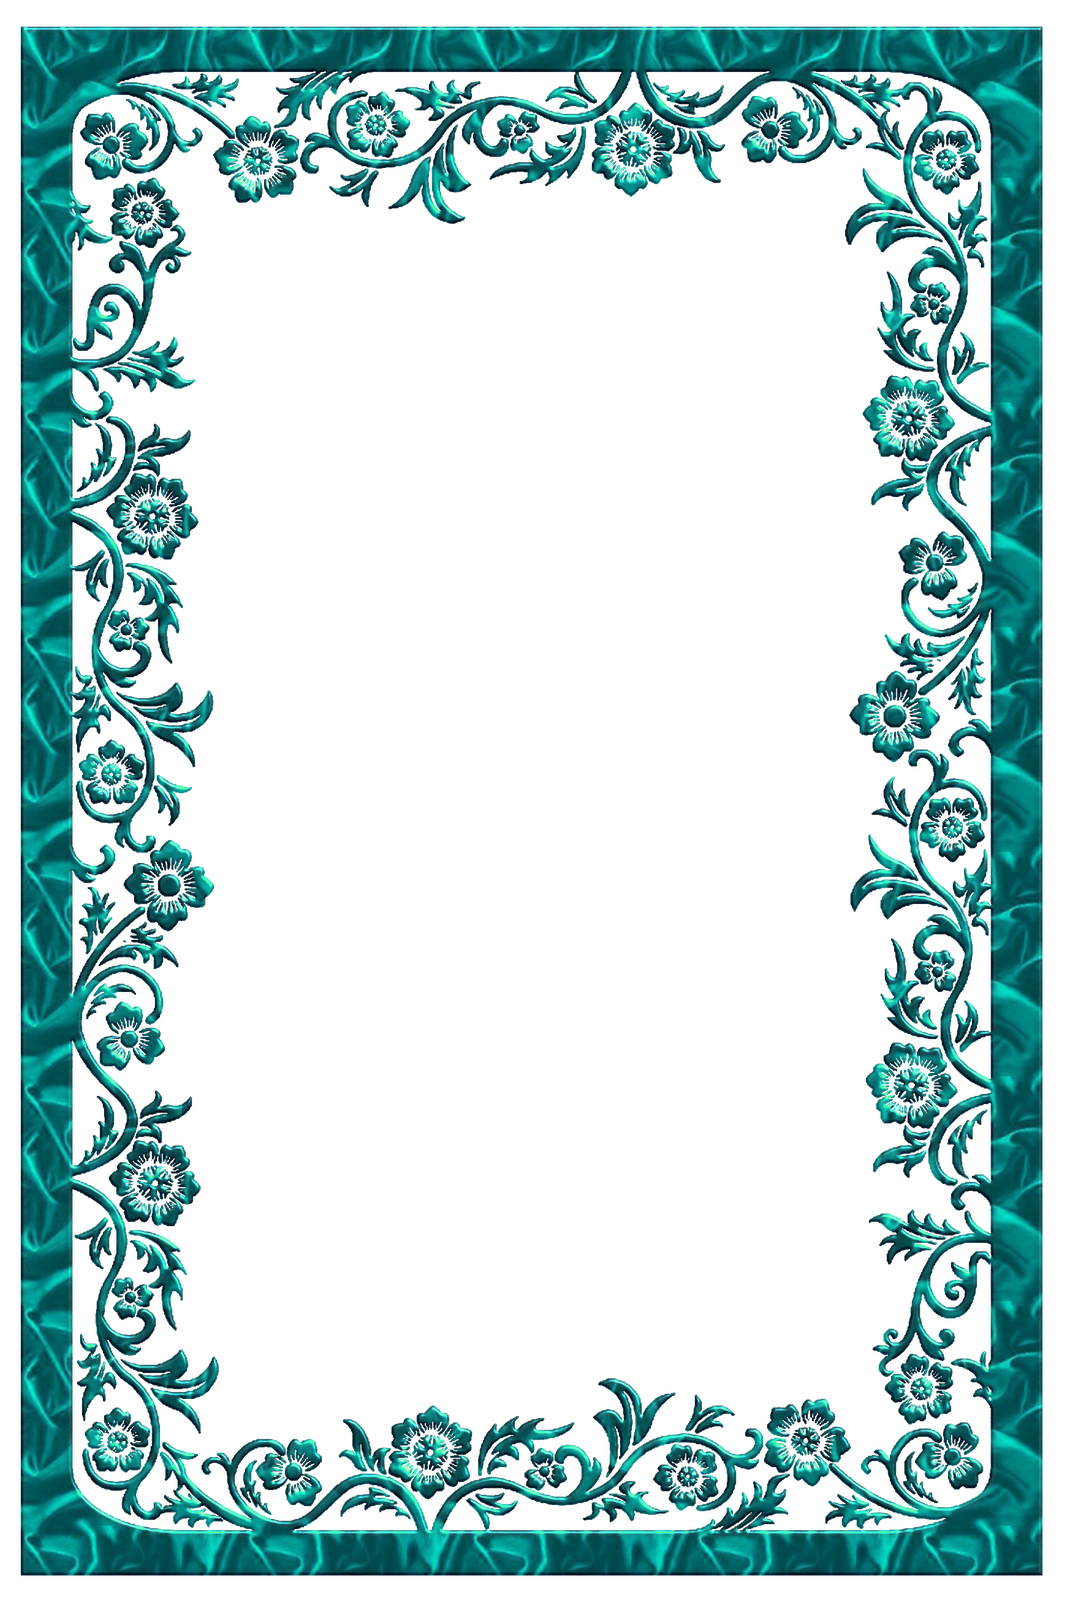 Teal Cadre Clipart PNG Image